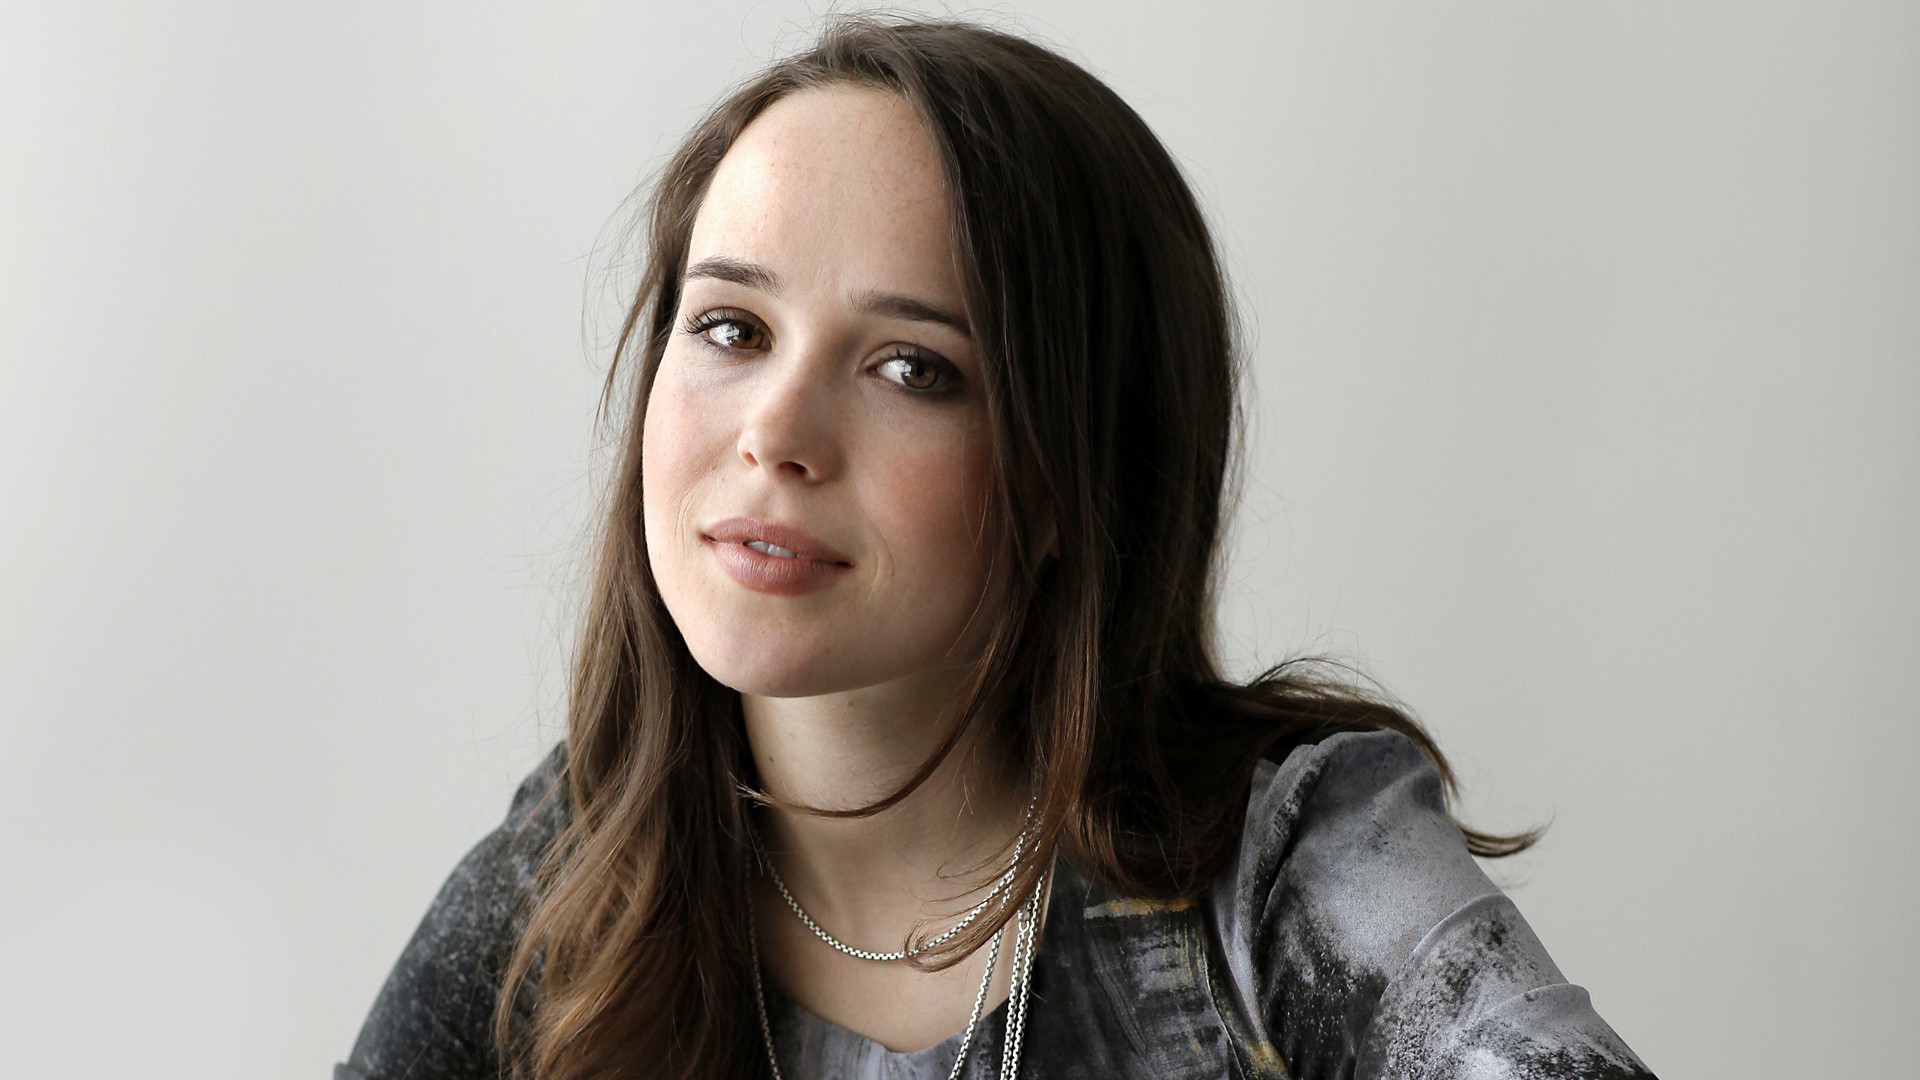 Ellen Page Cast in a Straight Role In 'Belushi' | /Bent